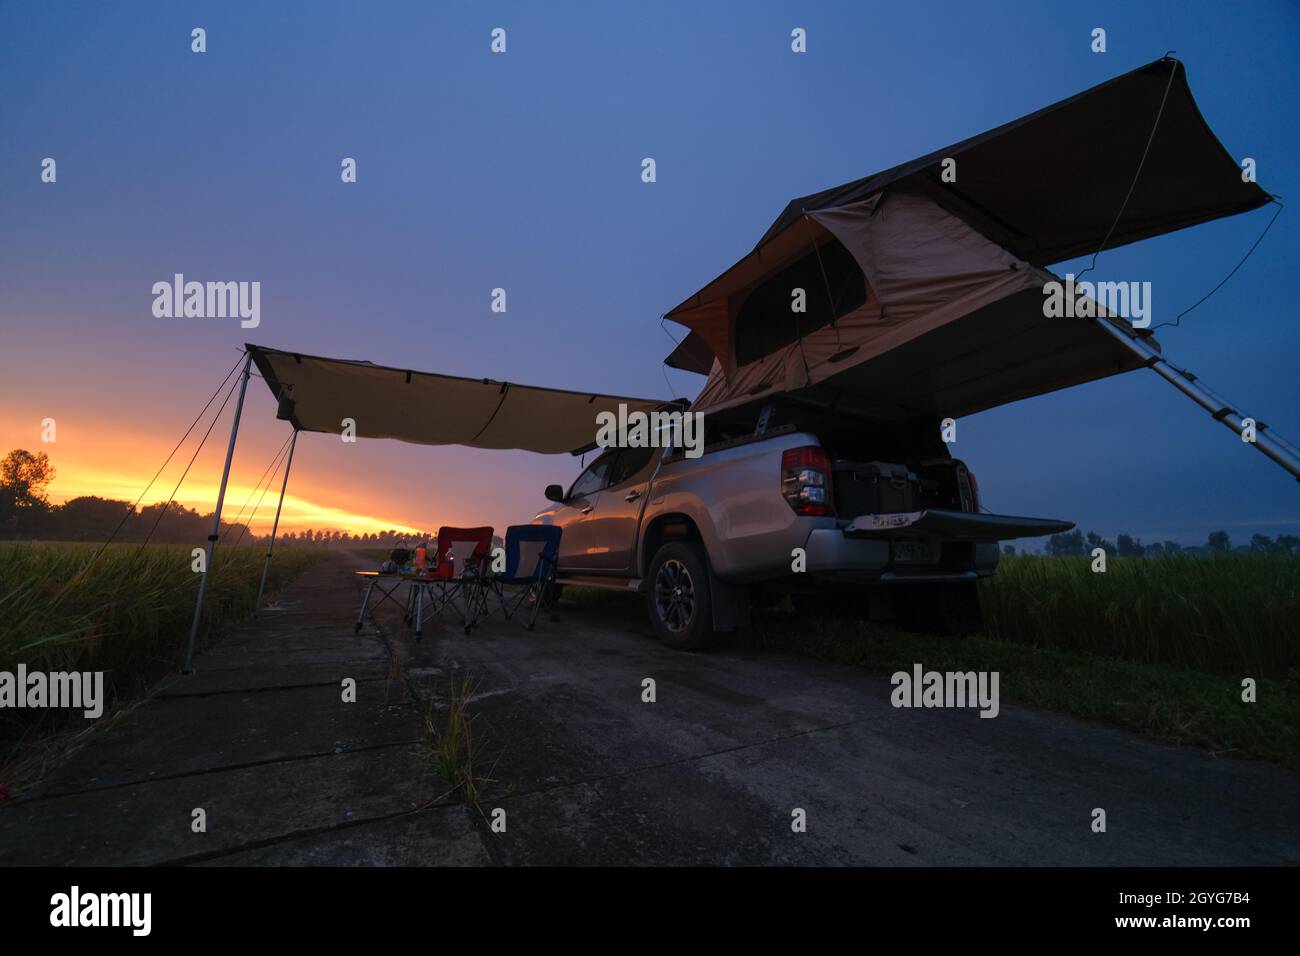 Truck With Roof Top Tent In Field Traveling By Car And Camping With Rooftop Tent Morning Landscape With Beautiful Sunrise Sky Camp Table And Chair Stock Photo Alamy